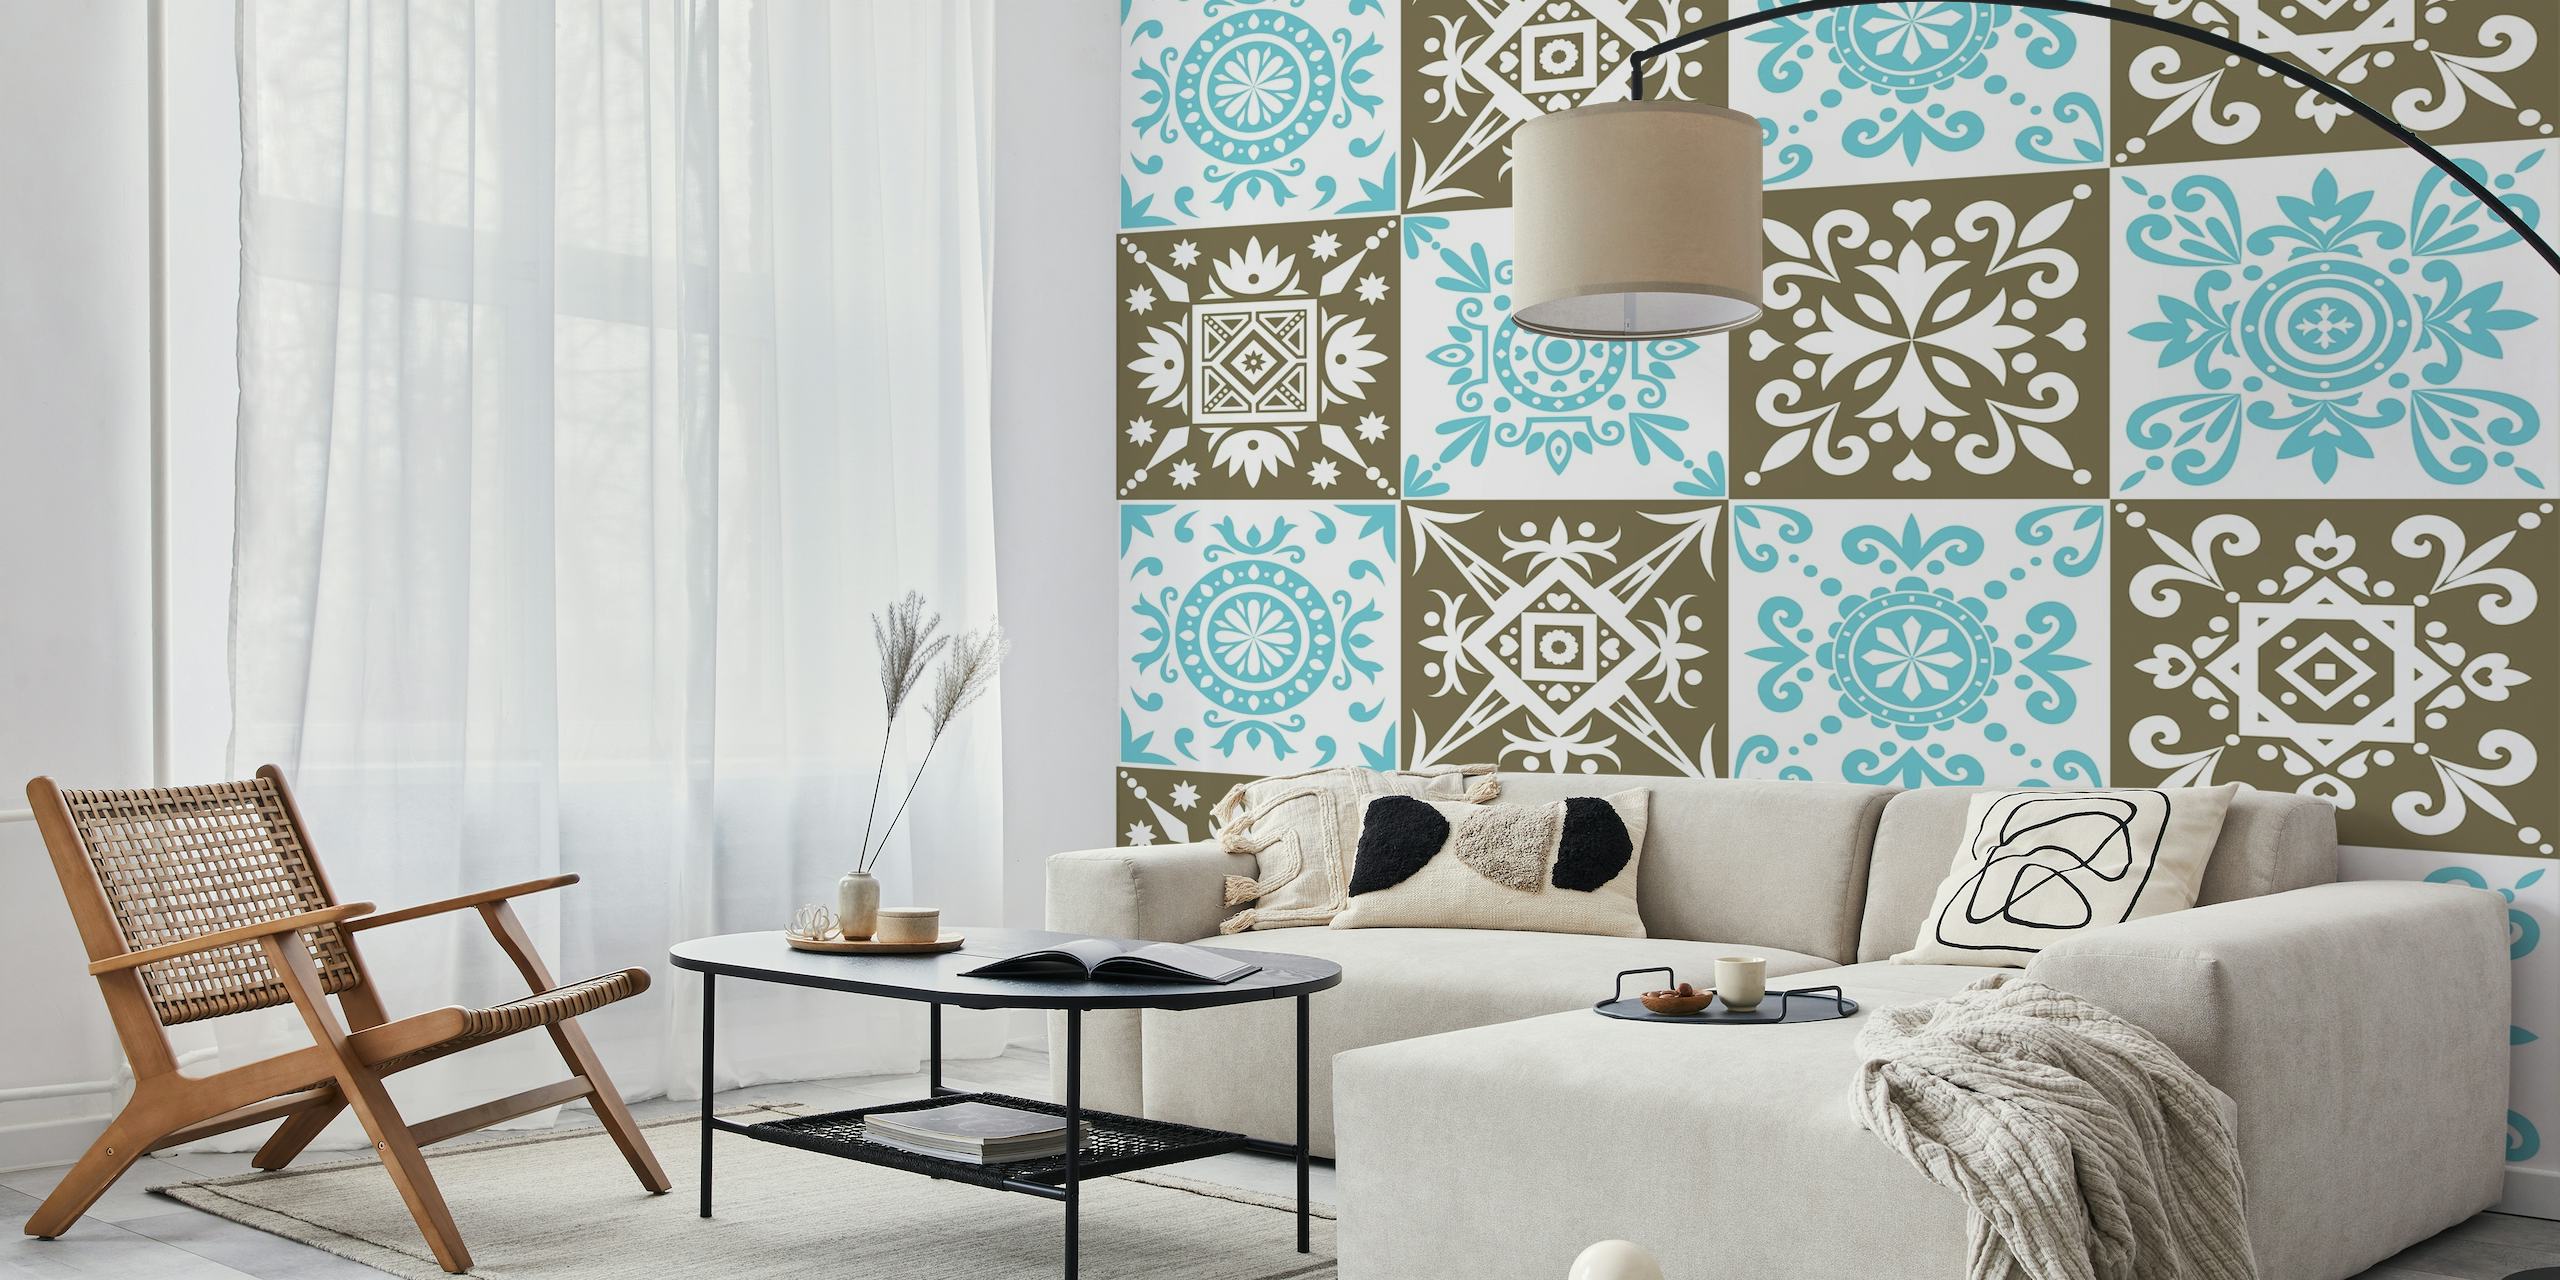 Moroccan geometric pattern wall mural with blue and brown traditional designs